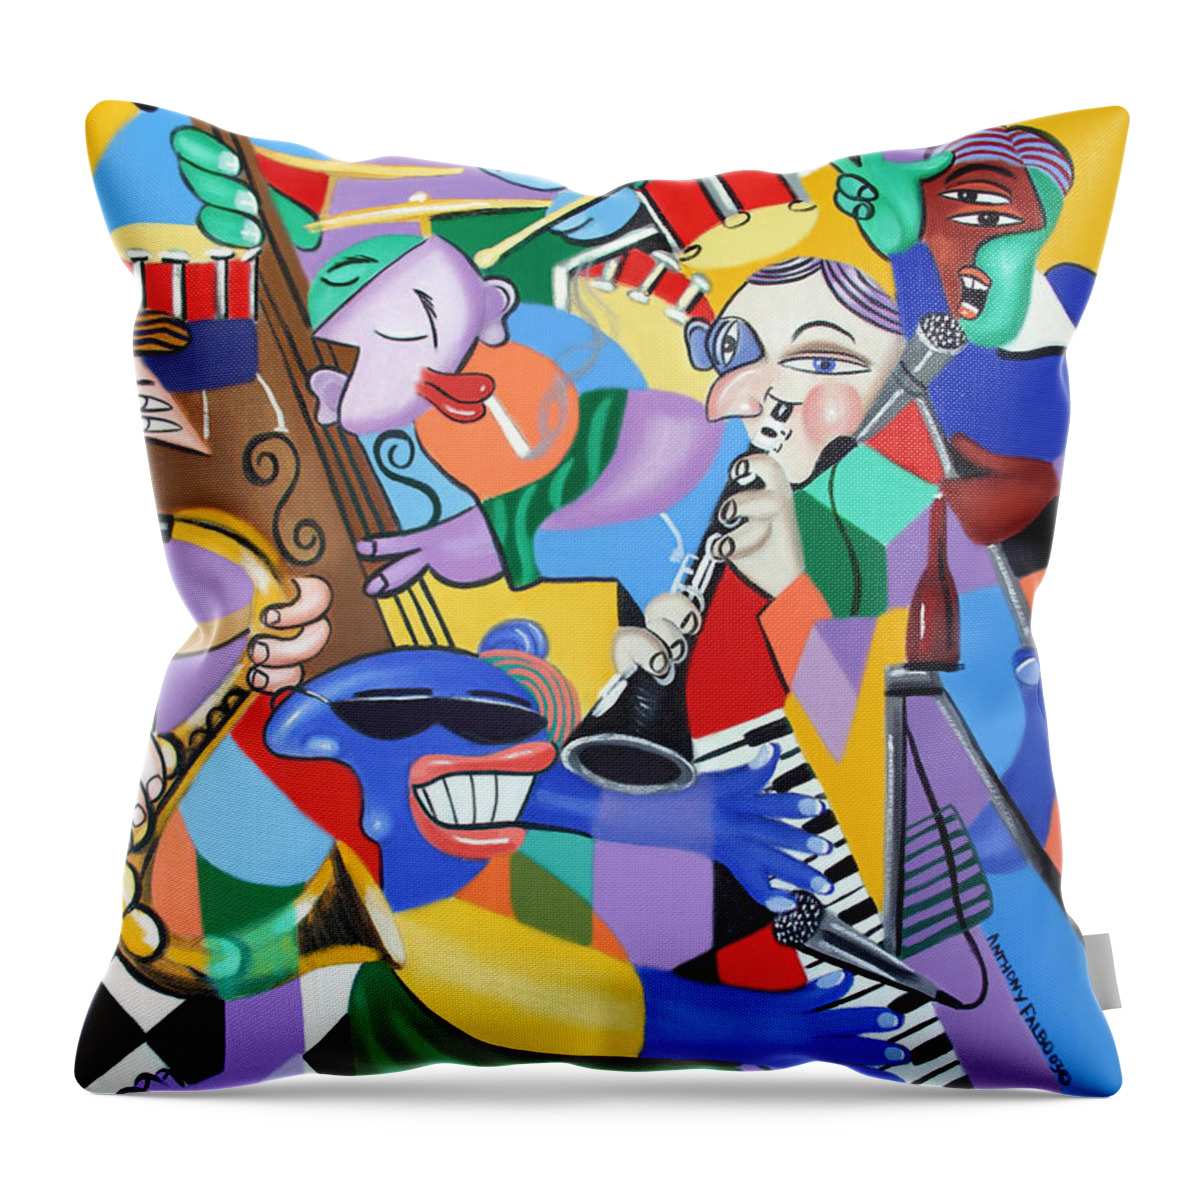 Toe Jam Framed Prints Throw Pillow featuring the painting Toe Jam by Anthony Falbo